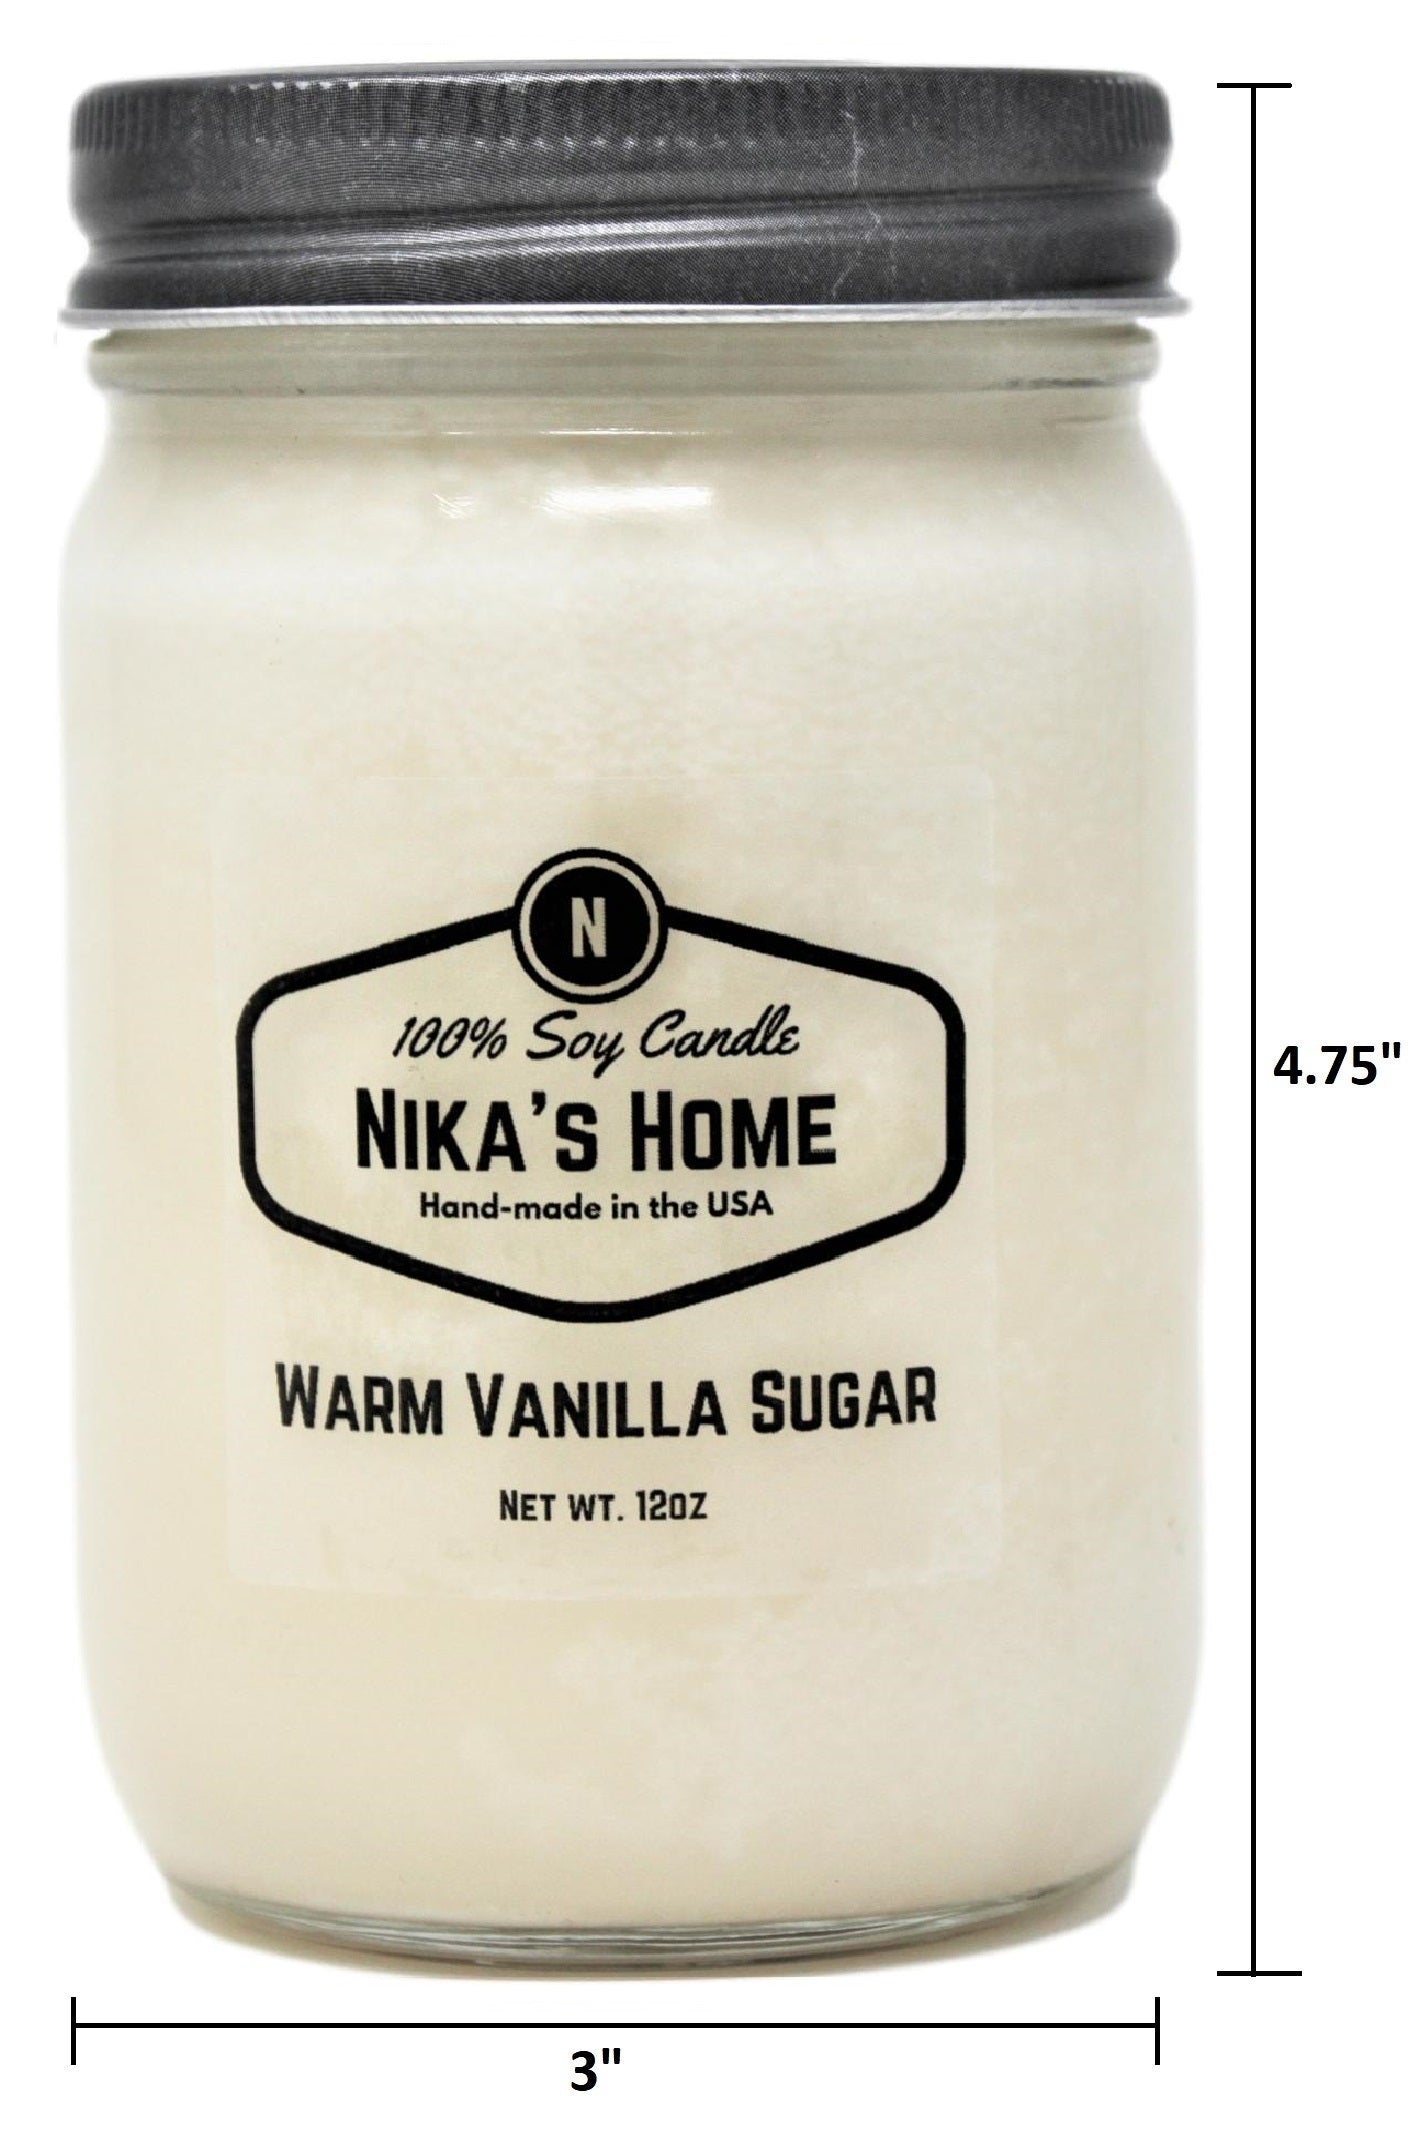 New Warm Vanilla Sugar packaging is so cute. And so 90s/early